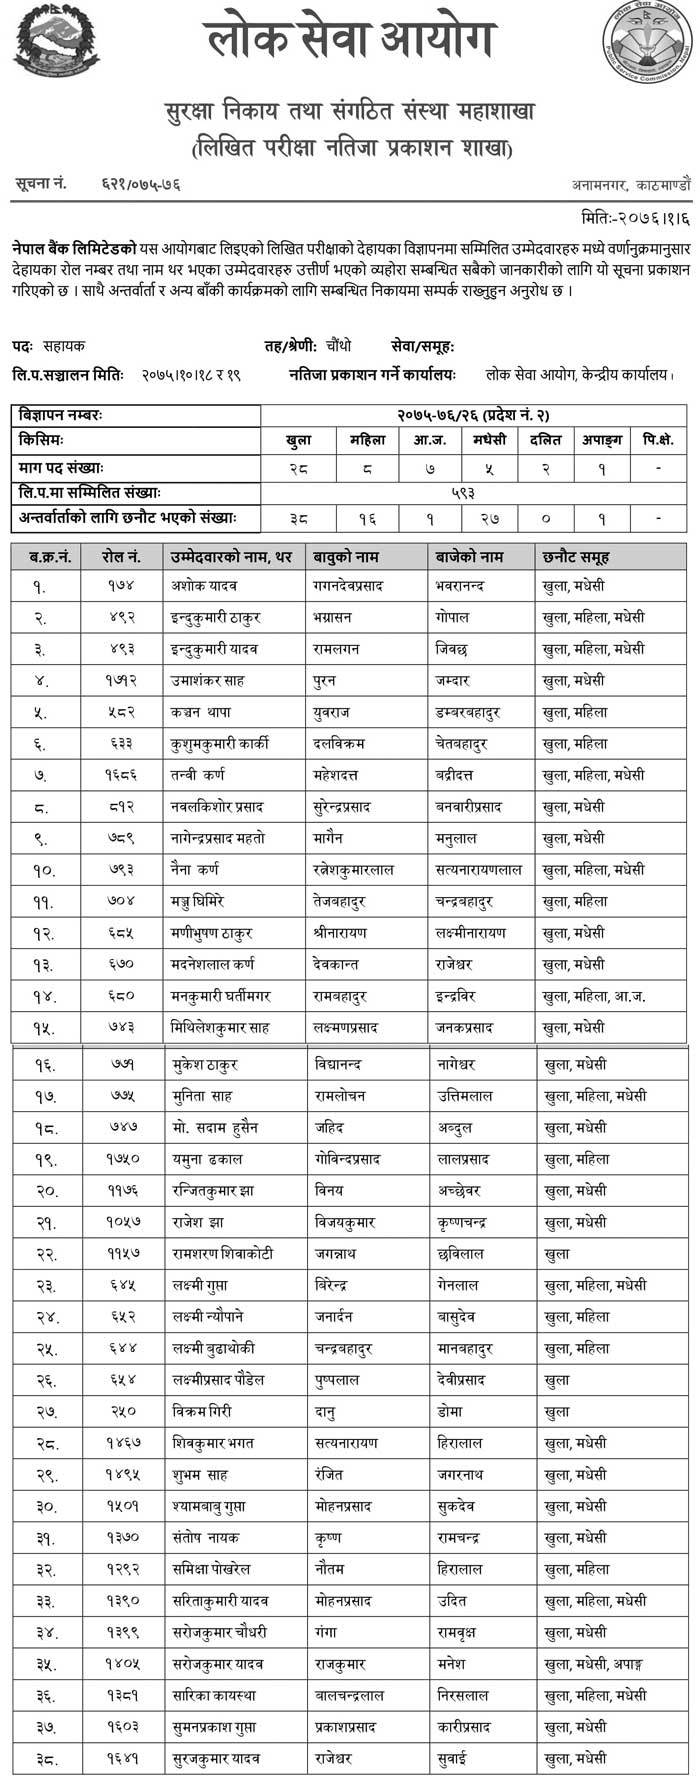 Nepal Bank Written Exam Result of Assistant Level - Province 2